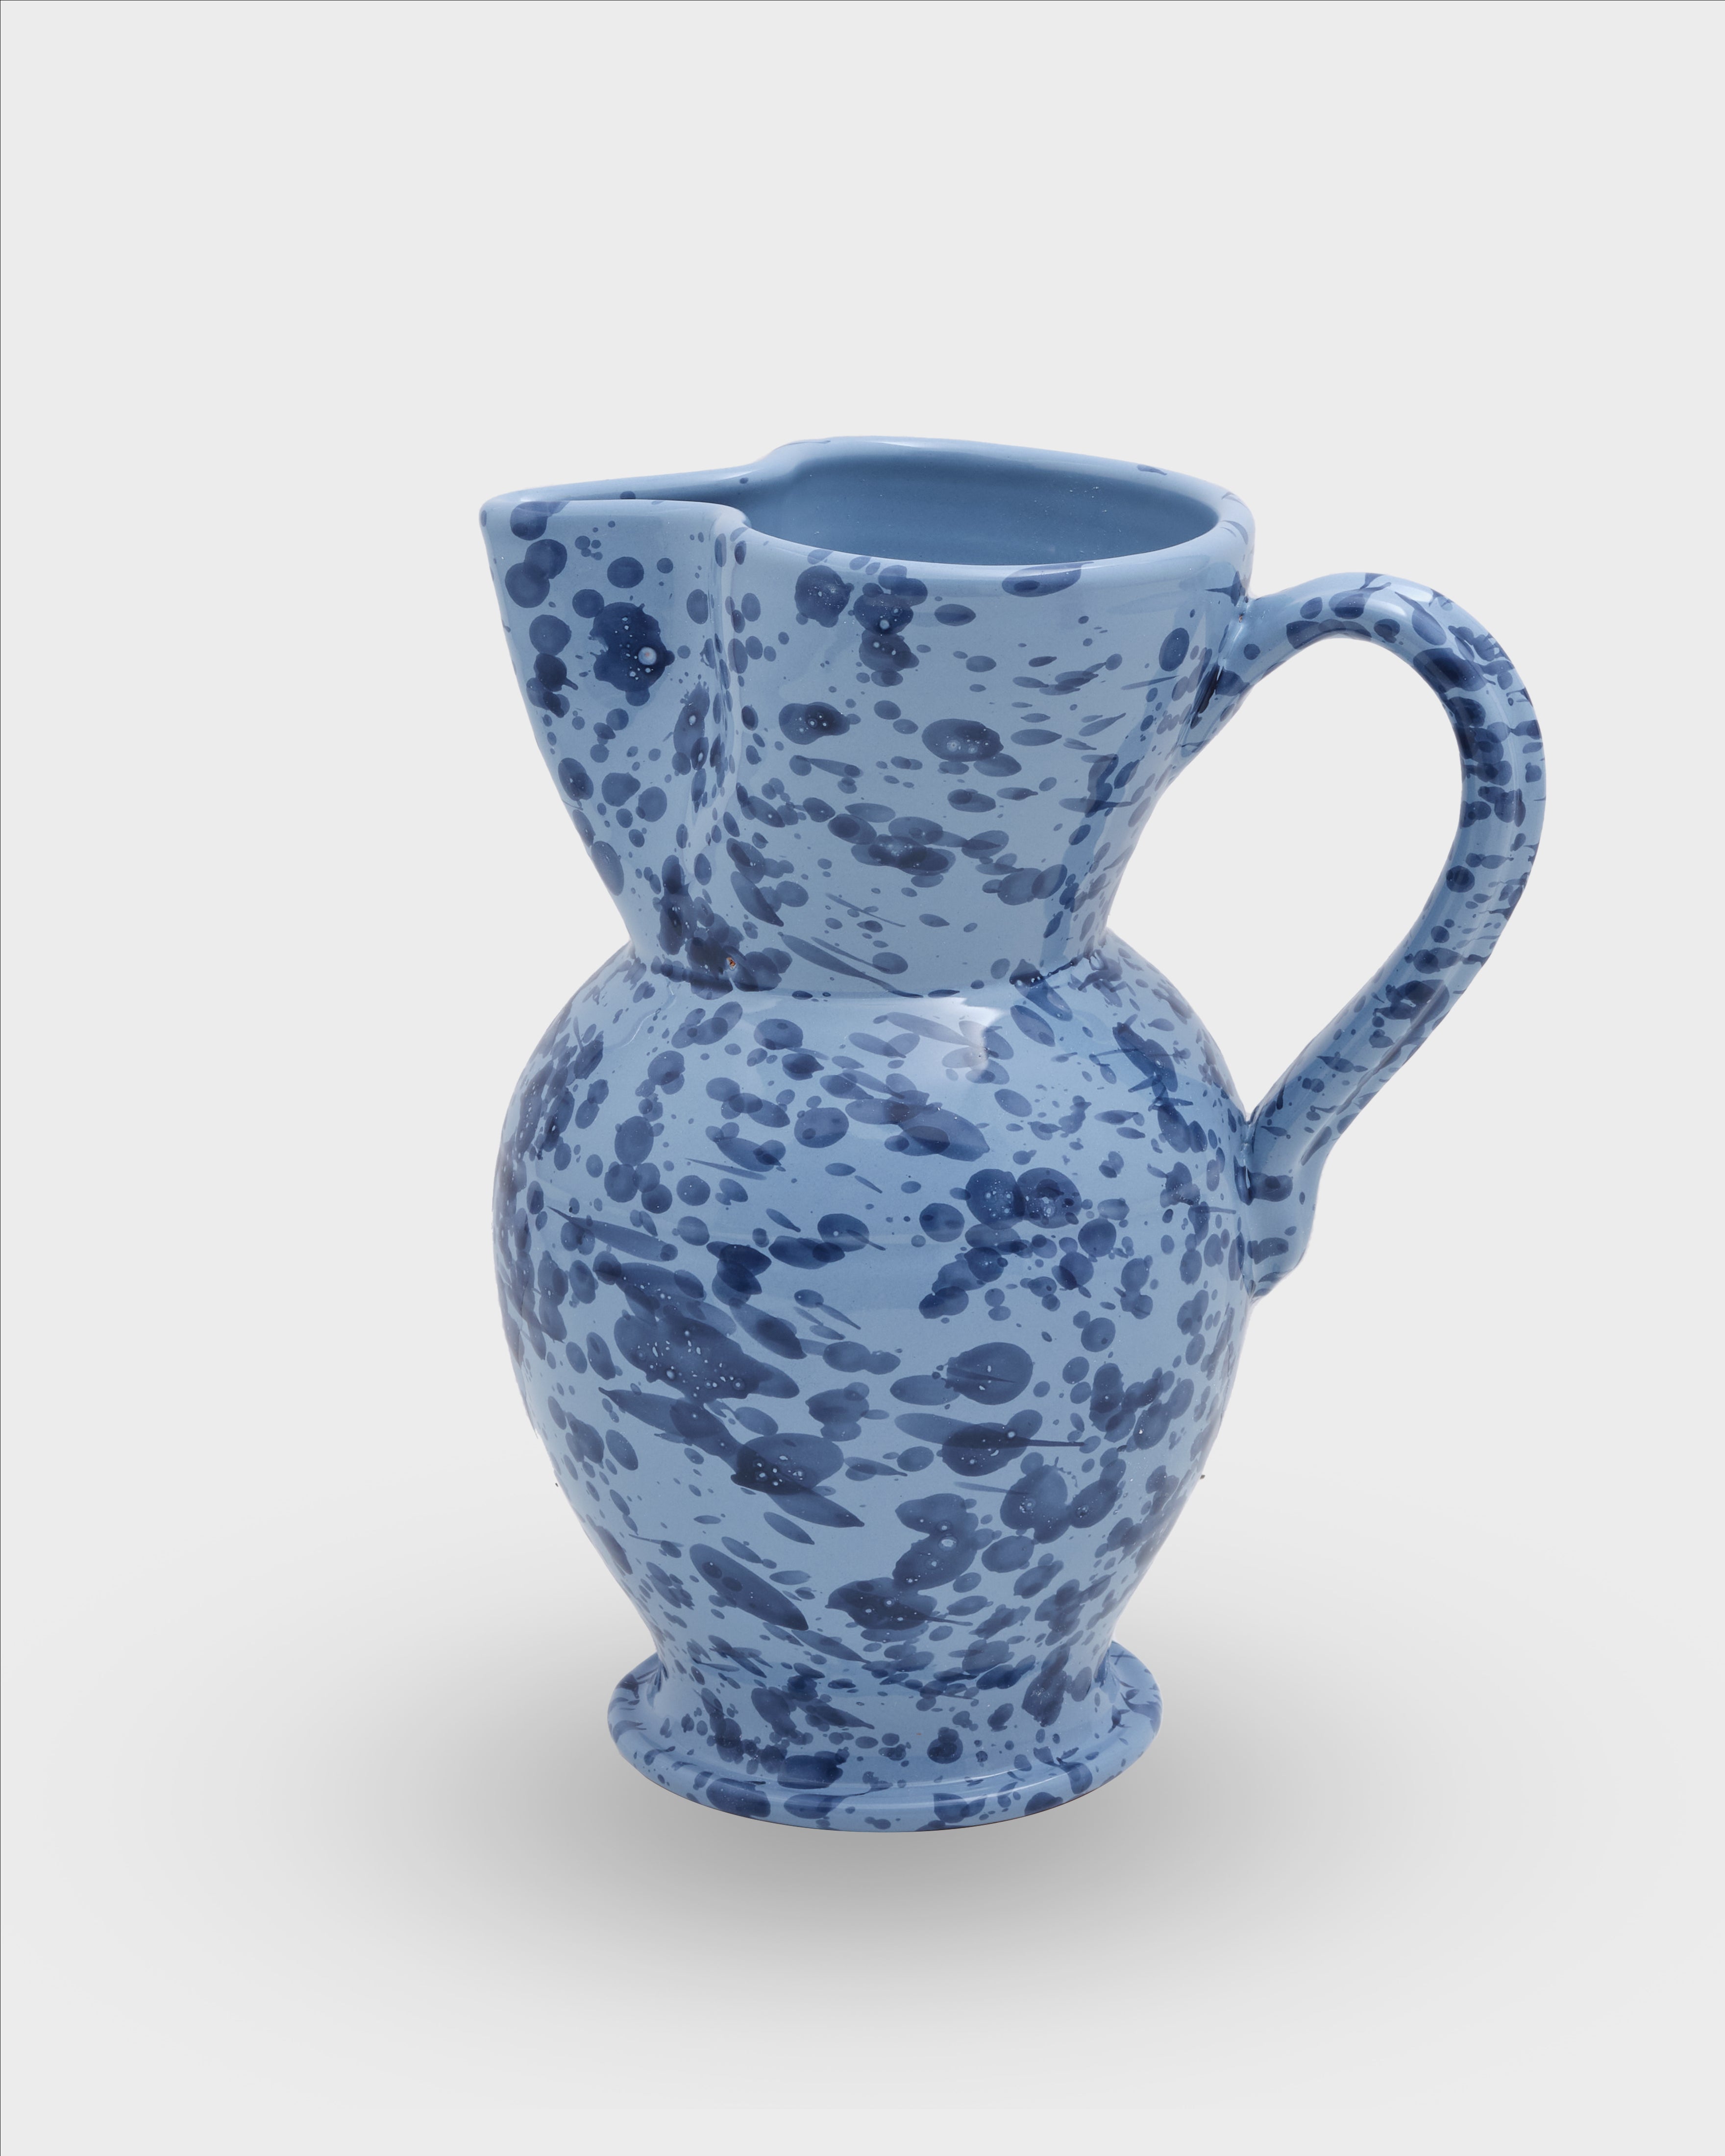 Pottery Pitcher with Blue House & Hearts on front. Cute pitcher for any  room.